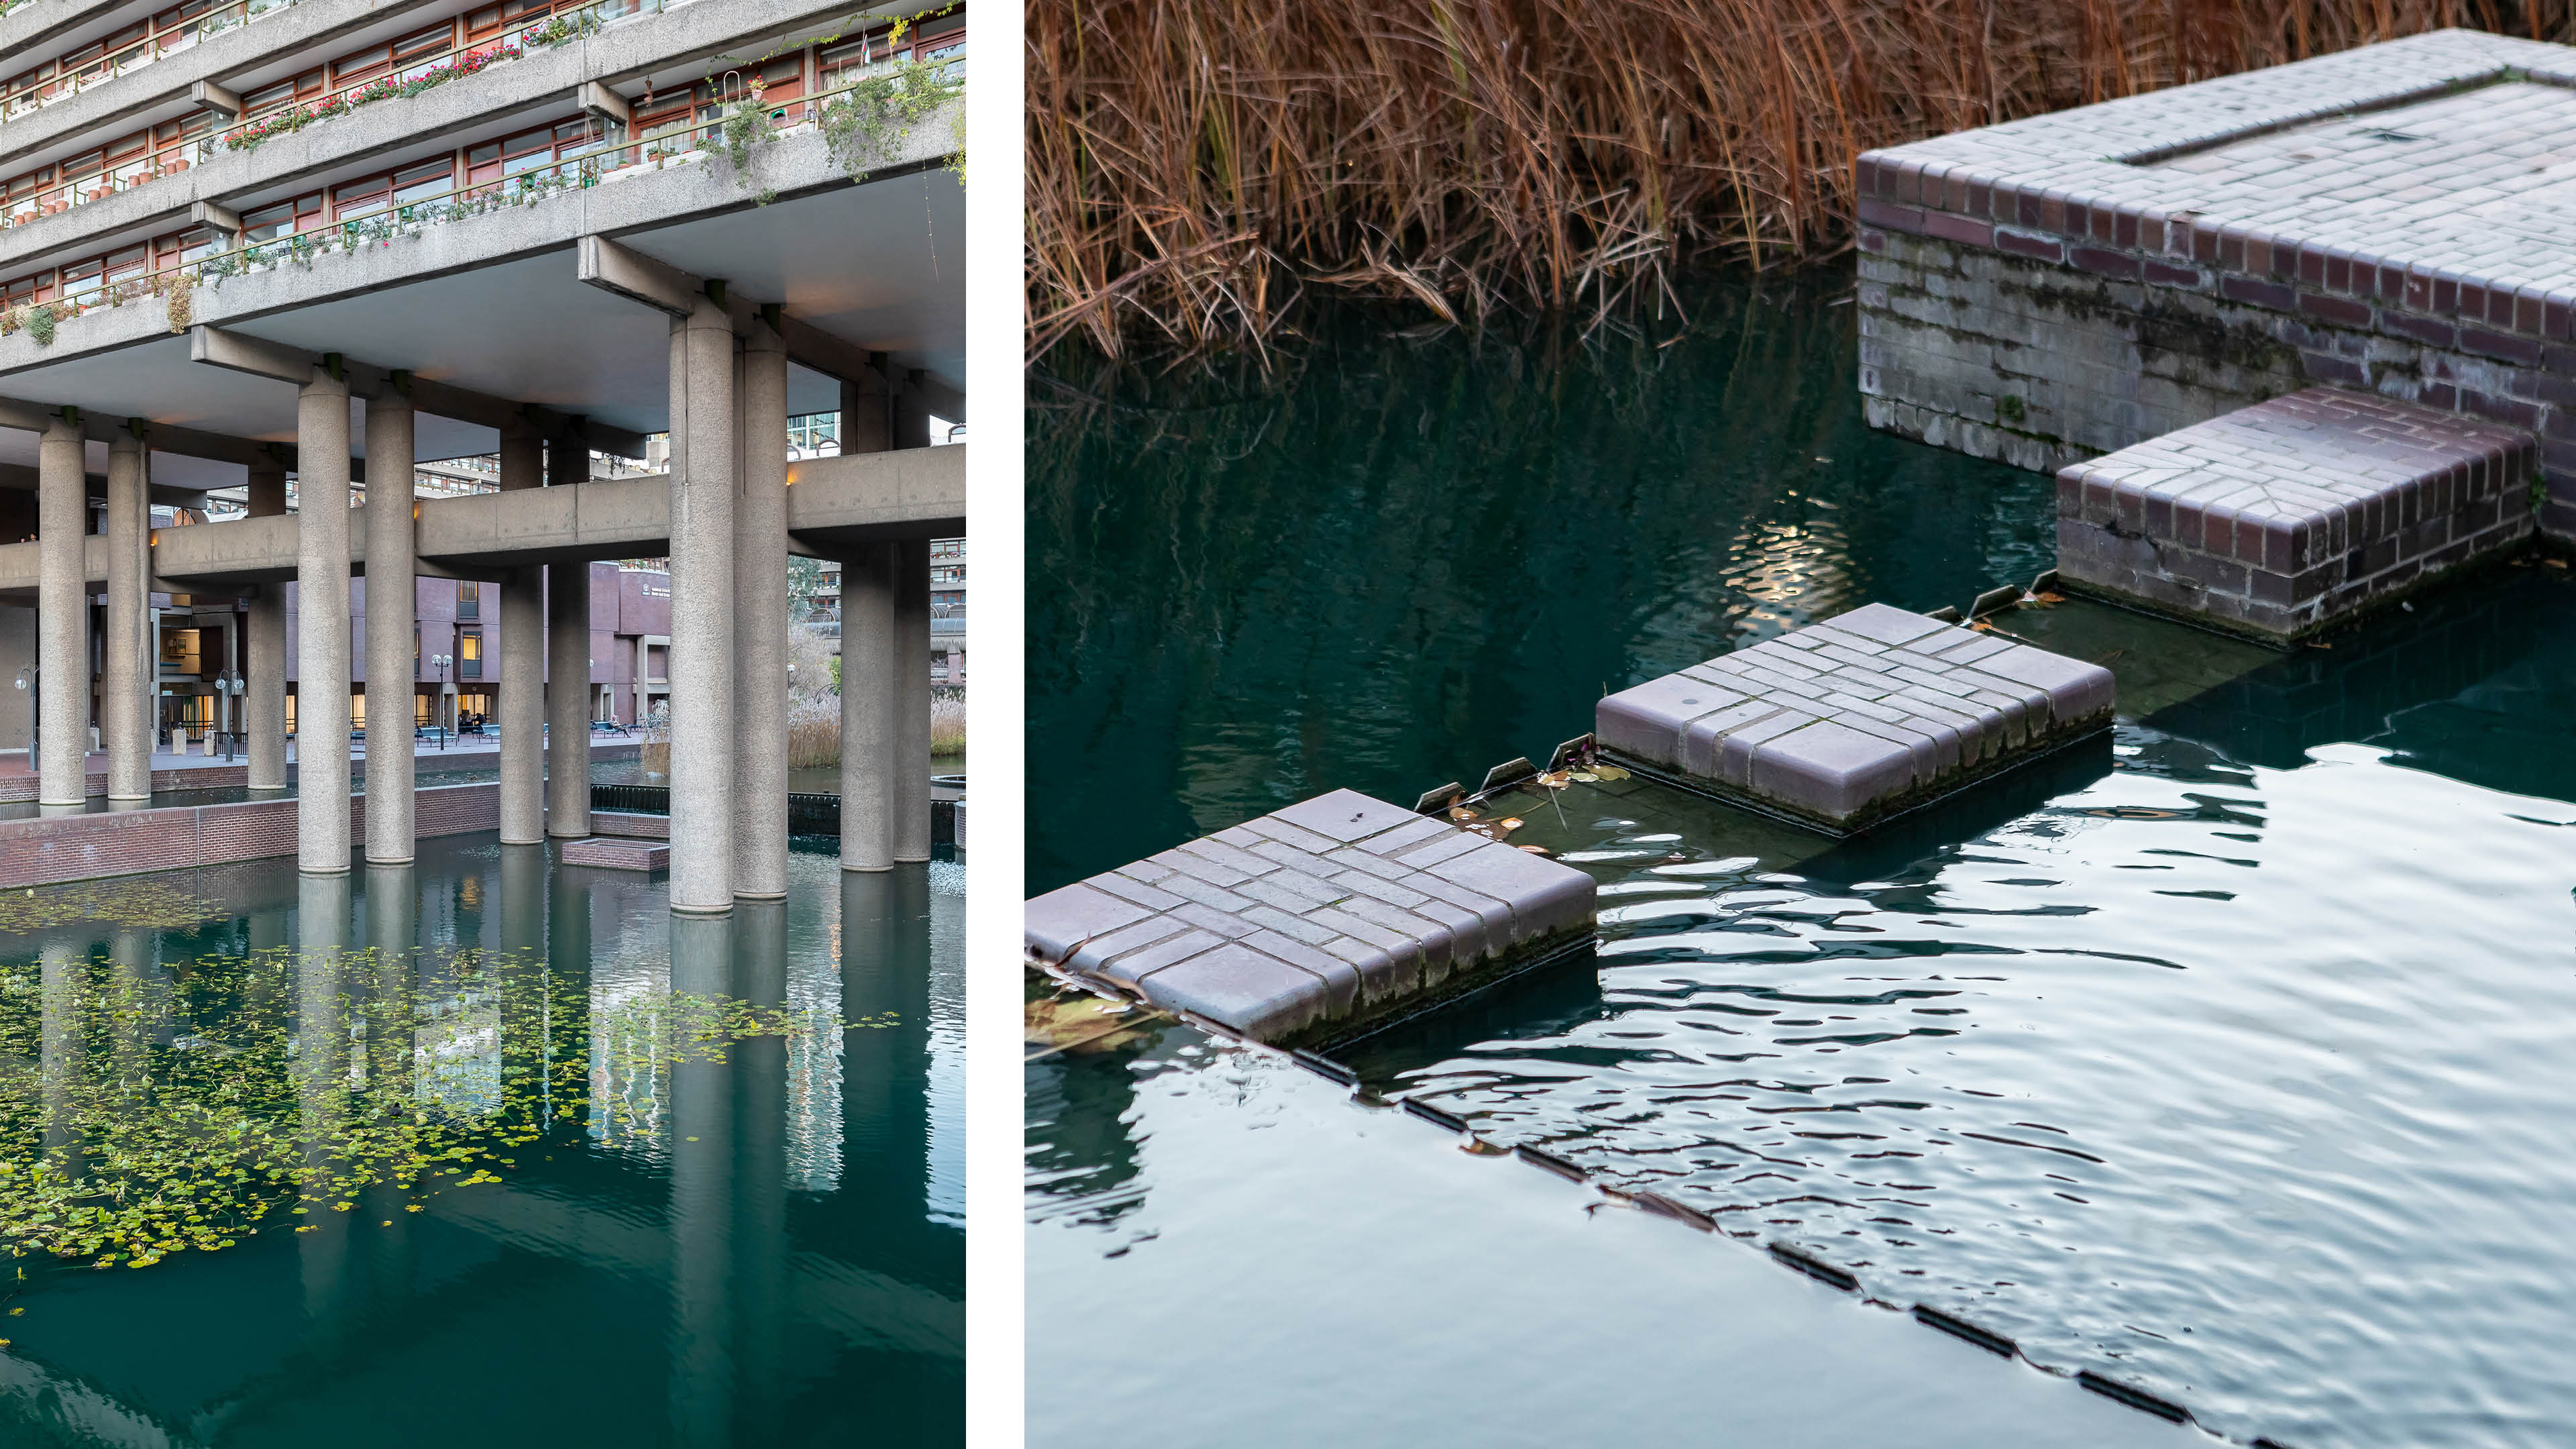 Concrete pillars and stepping stones in green tinted water